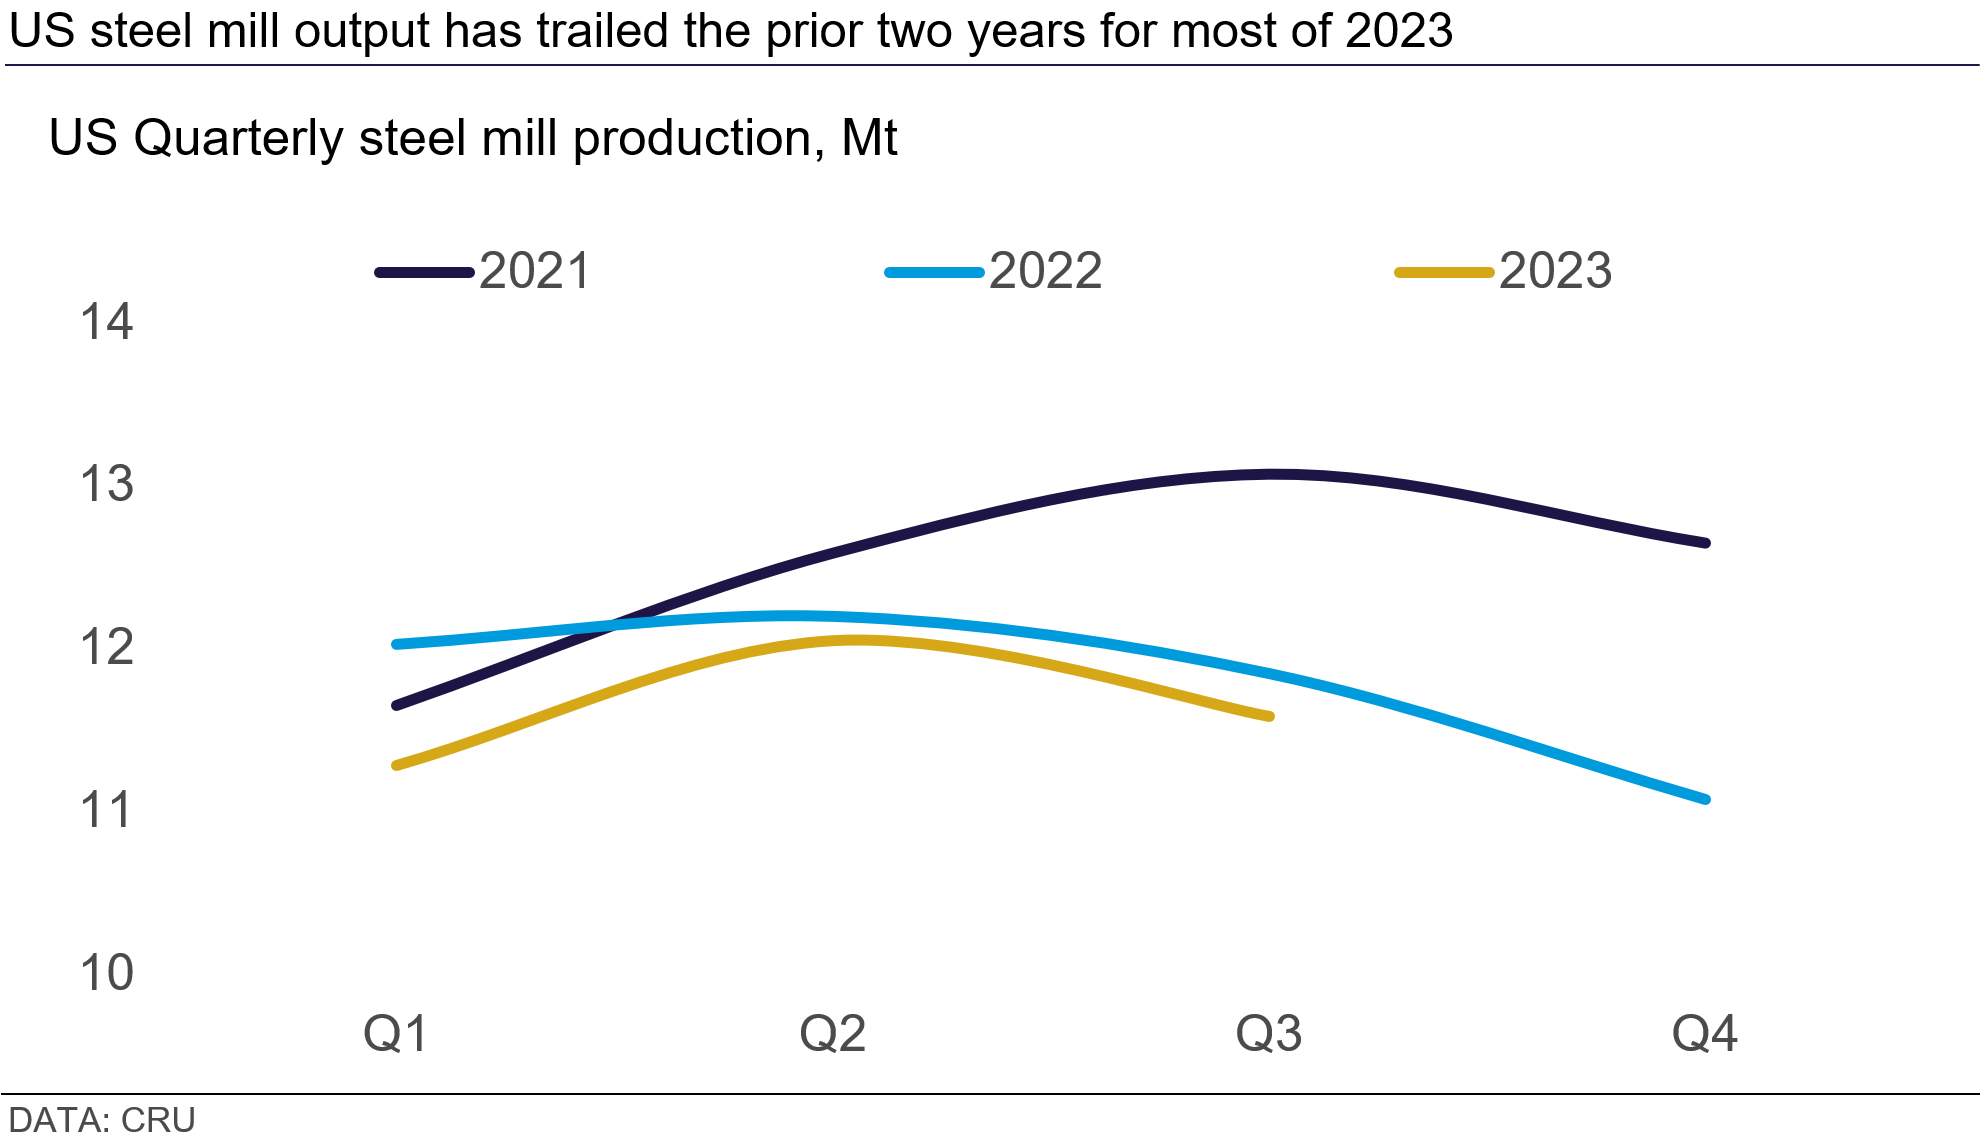 Graph showing that US steel mill output has trailed the prior two years for most of 2023